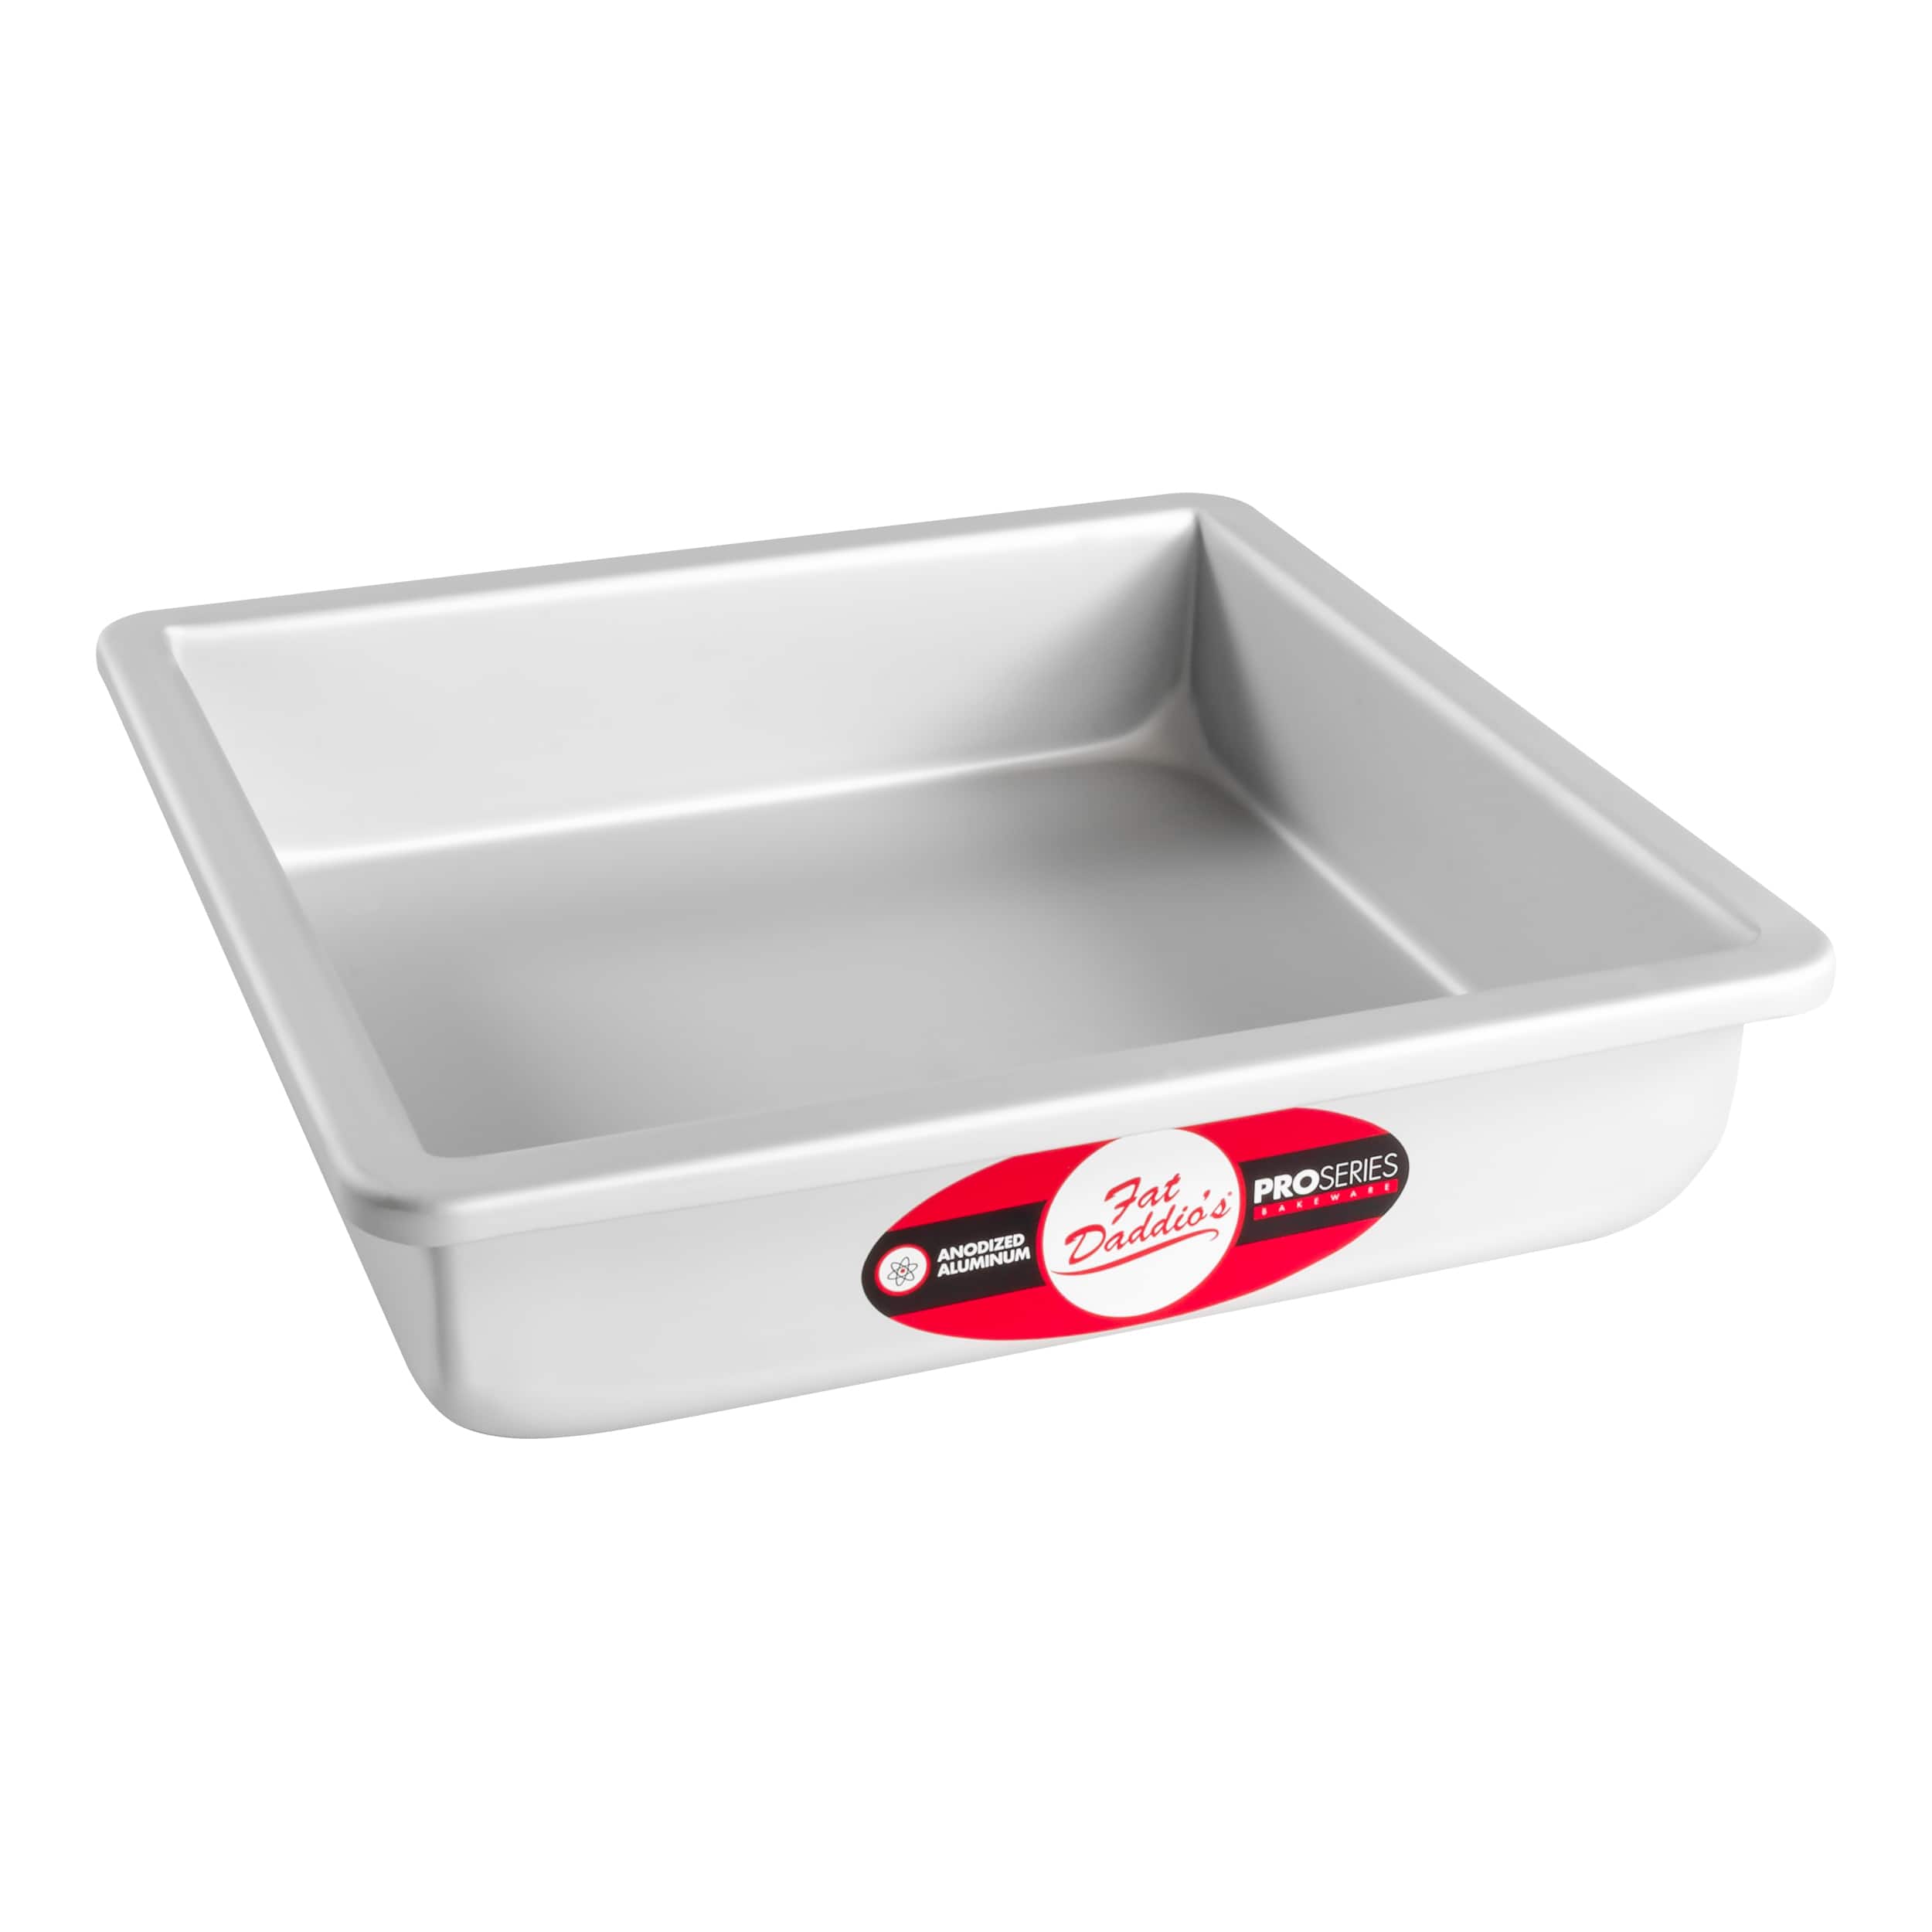 The Best 8-Inch Square Baking Pans